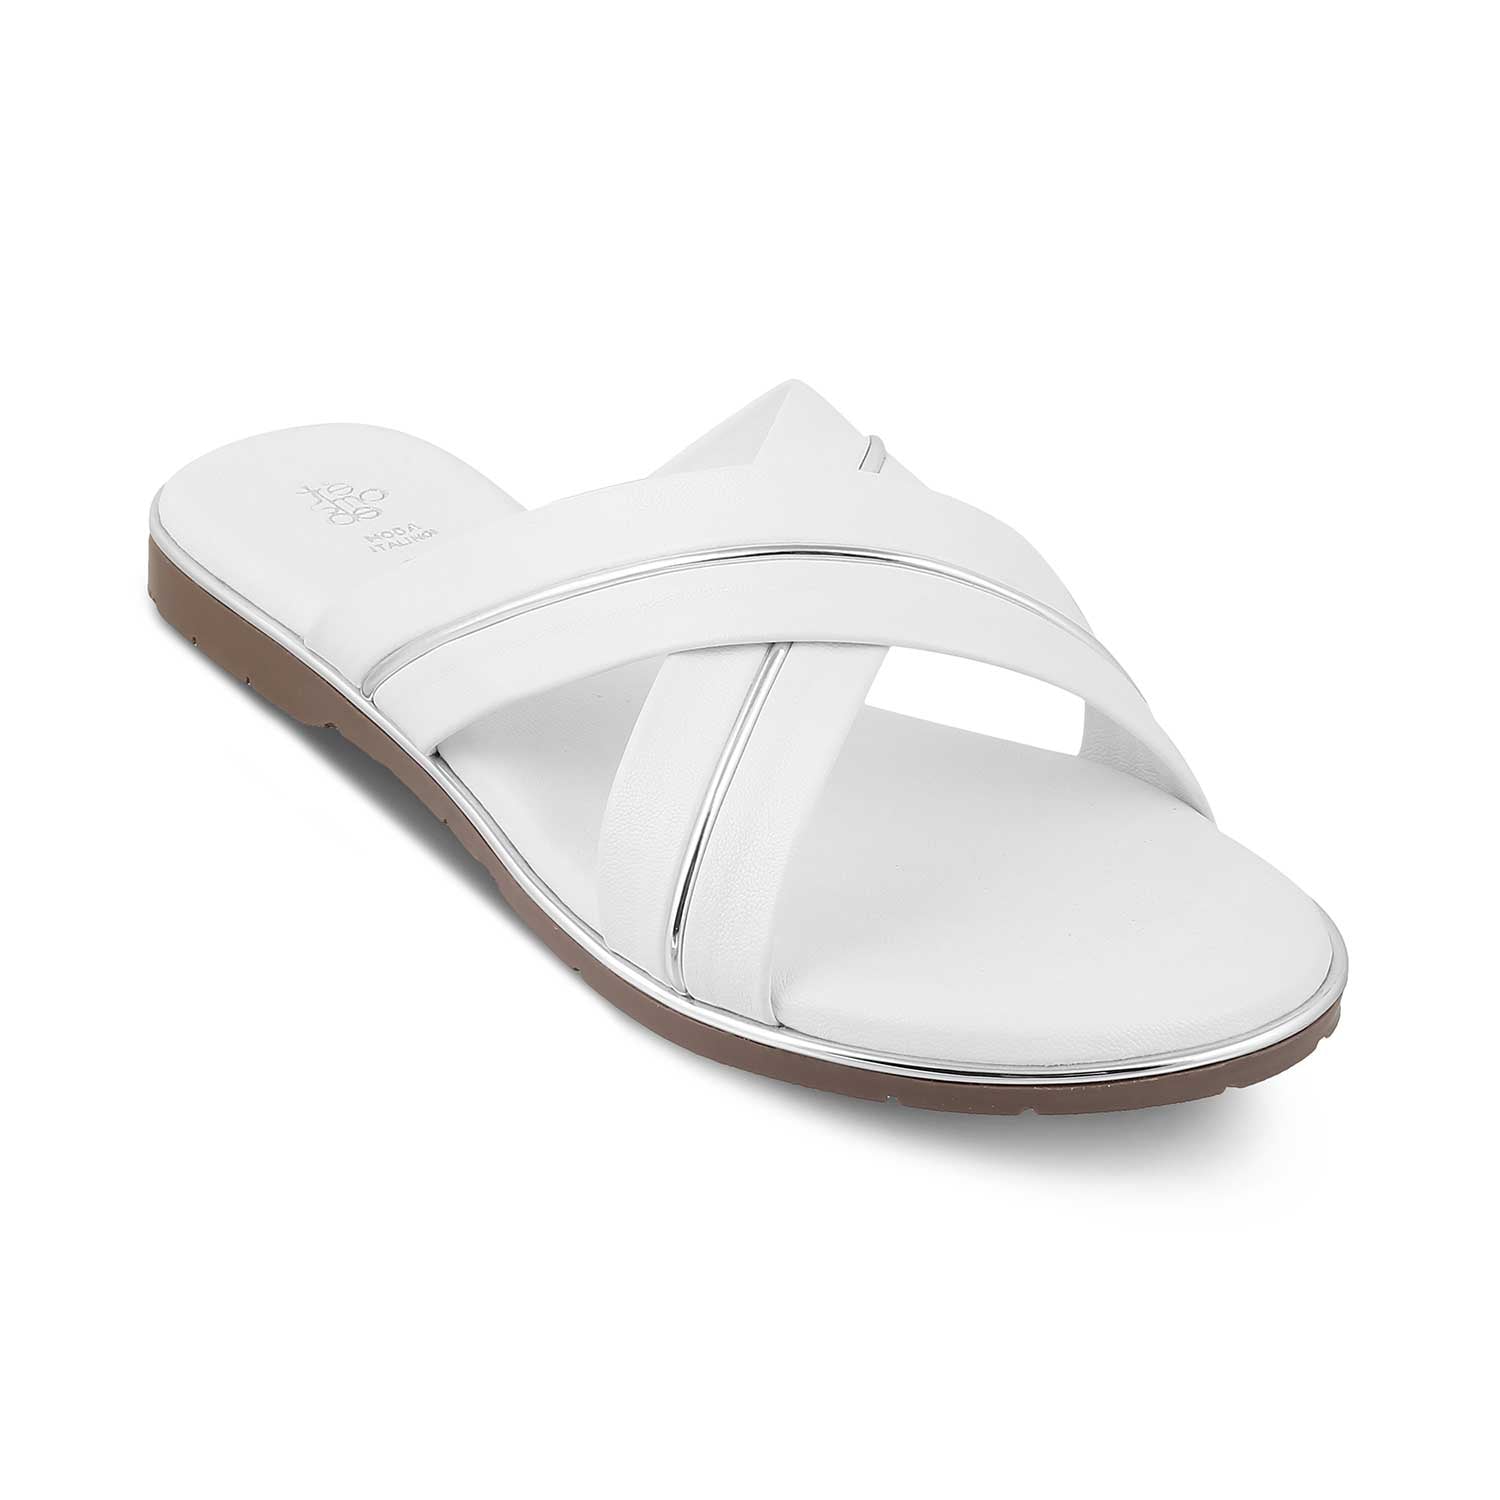 The Strep White Women's Casual Flats Tresmode - Tresmode